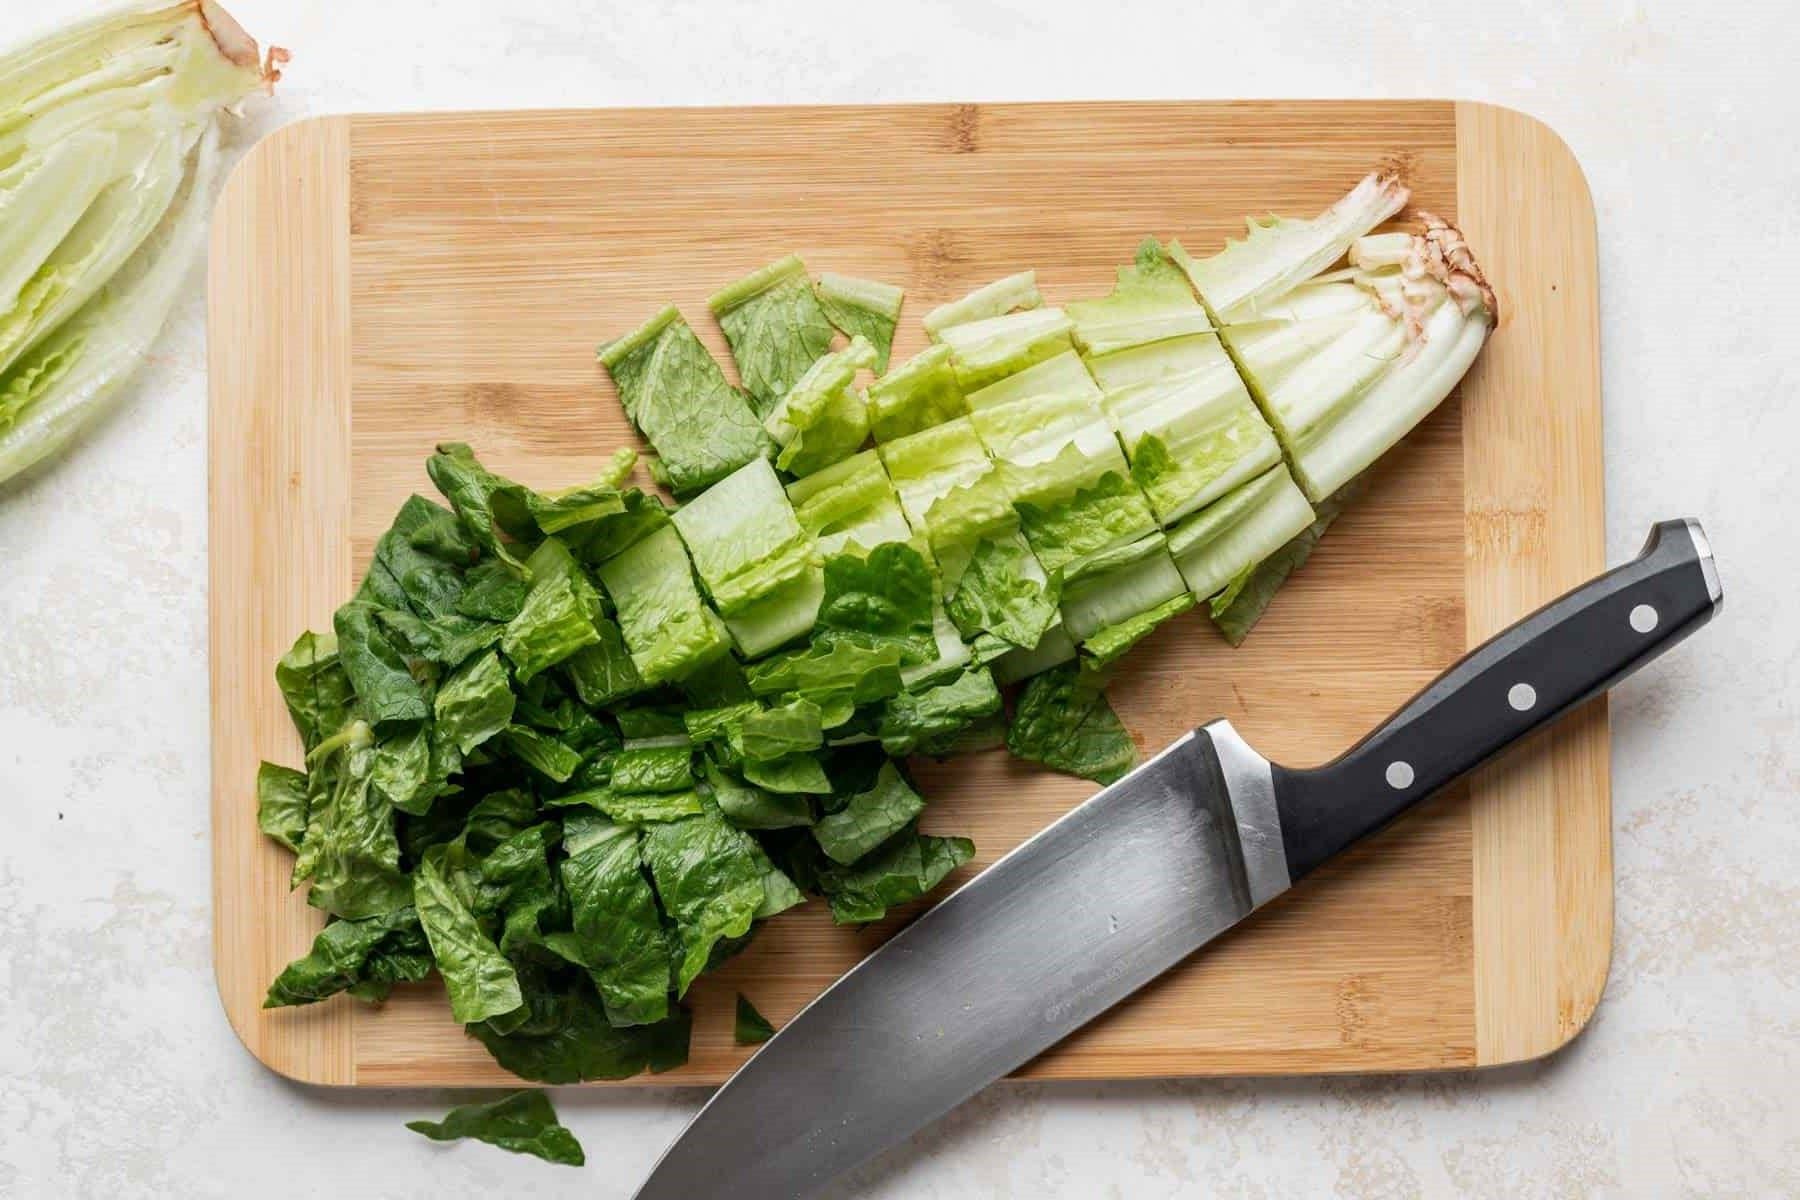 How To Chop Romaine Lettuce